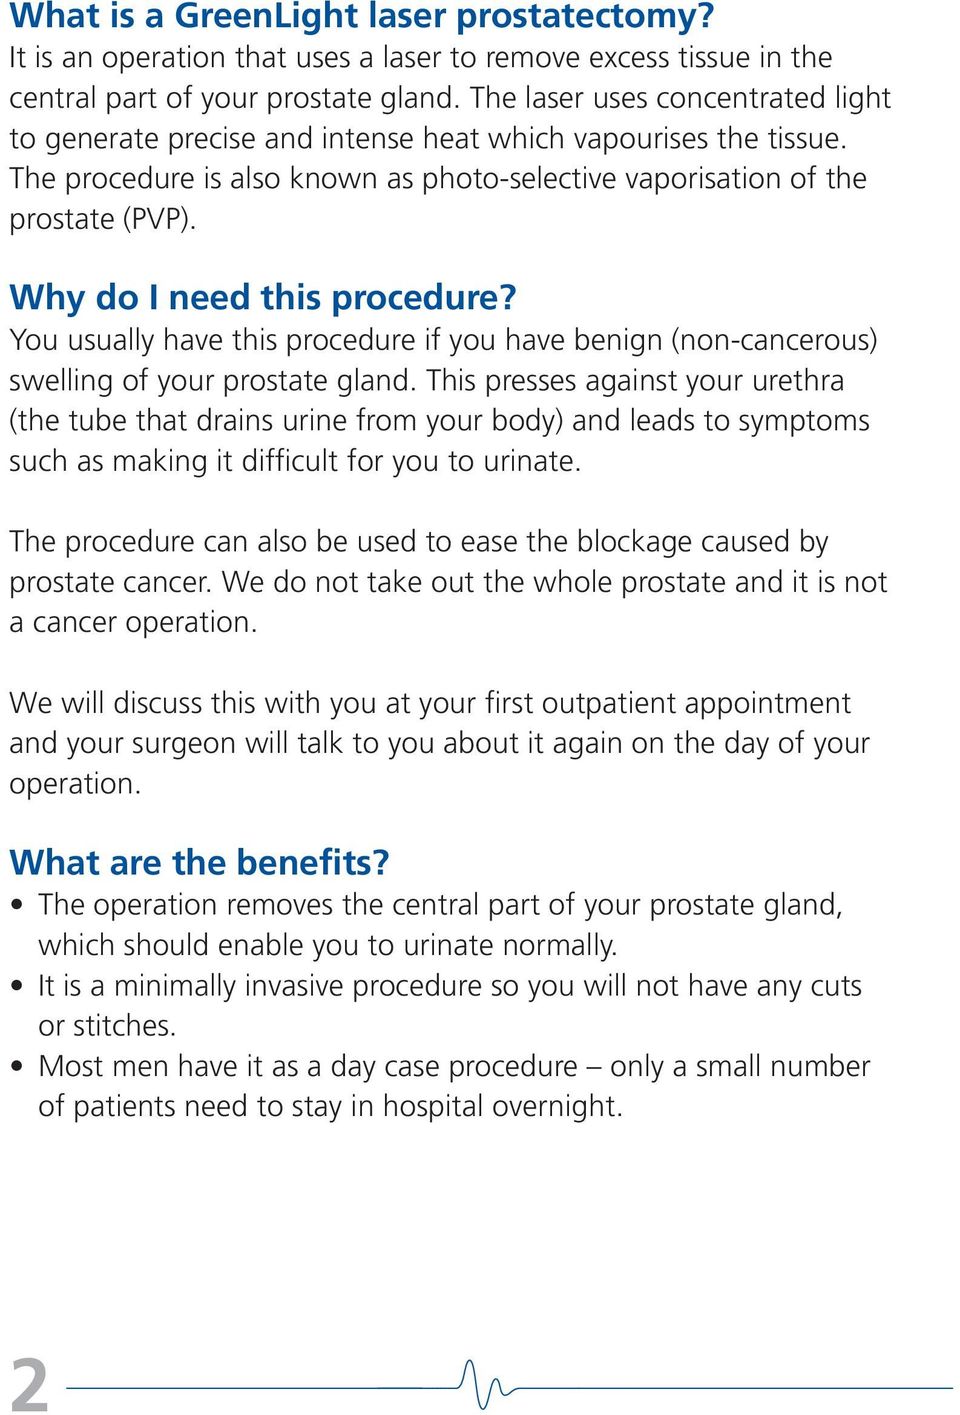 Why do I need this procedure? You usually have this procedure if you have benign (non-cancerous) swelling of your prostate gland.